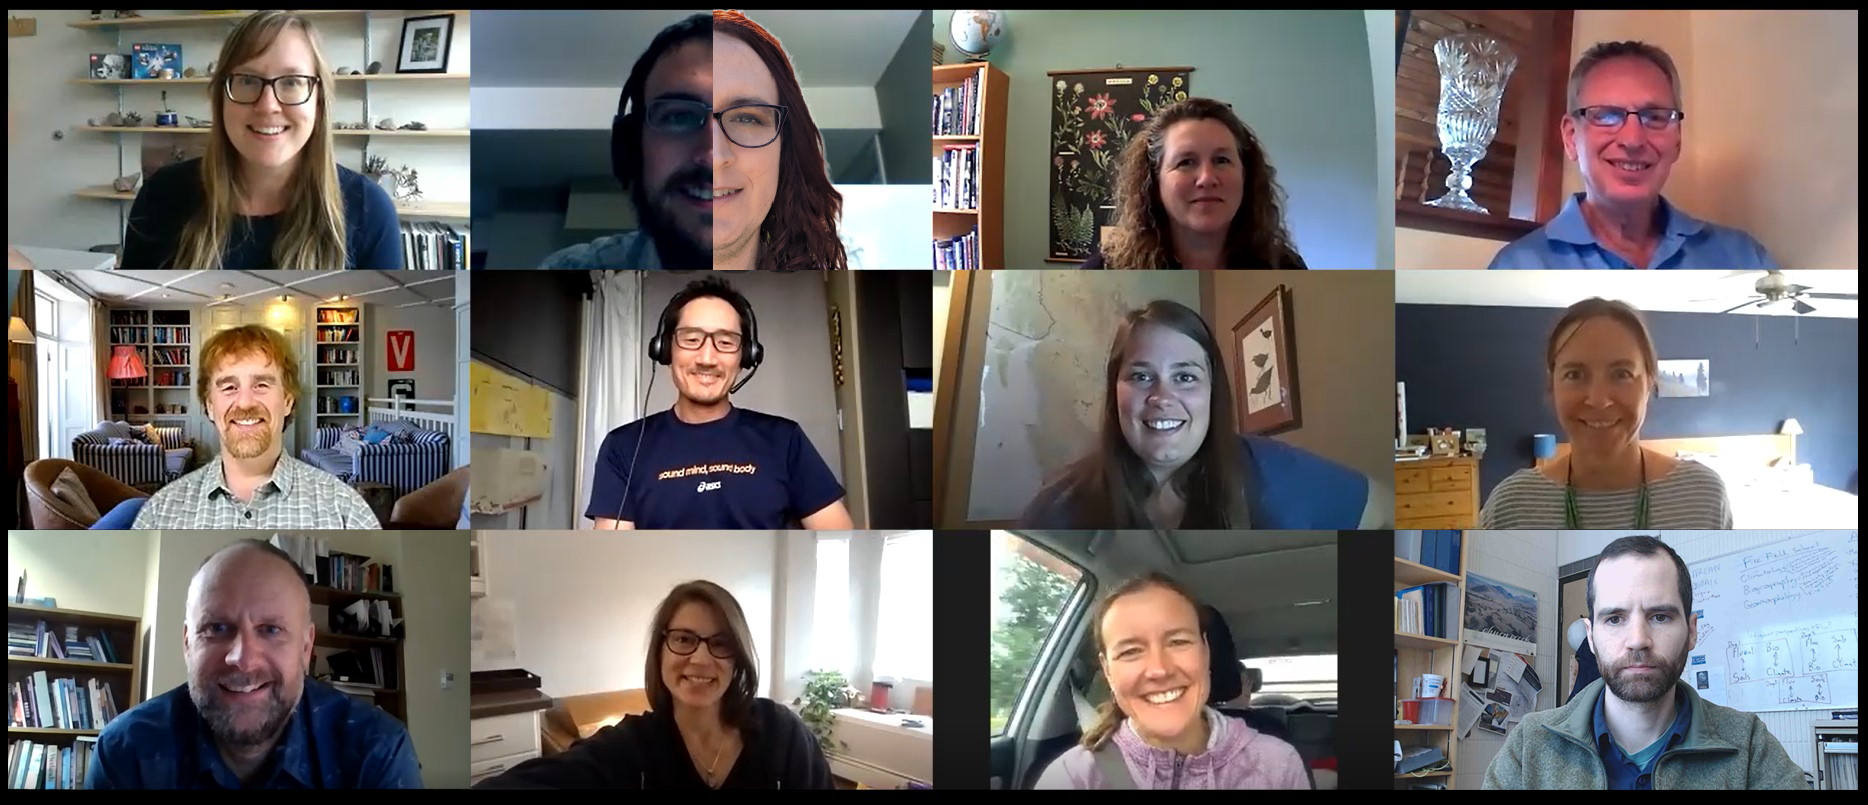 A screenshot of a Zoom room showing twelve people smiling.